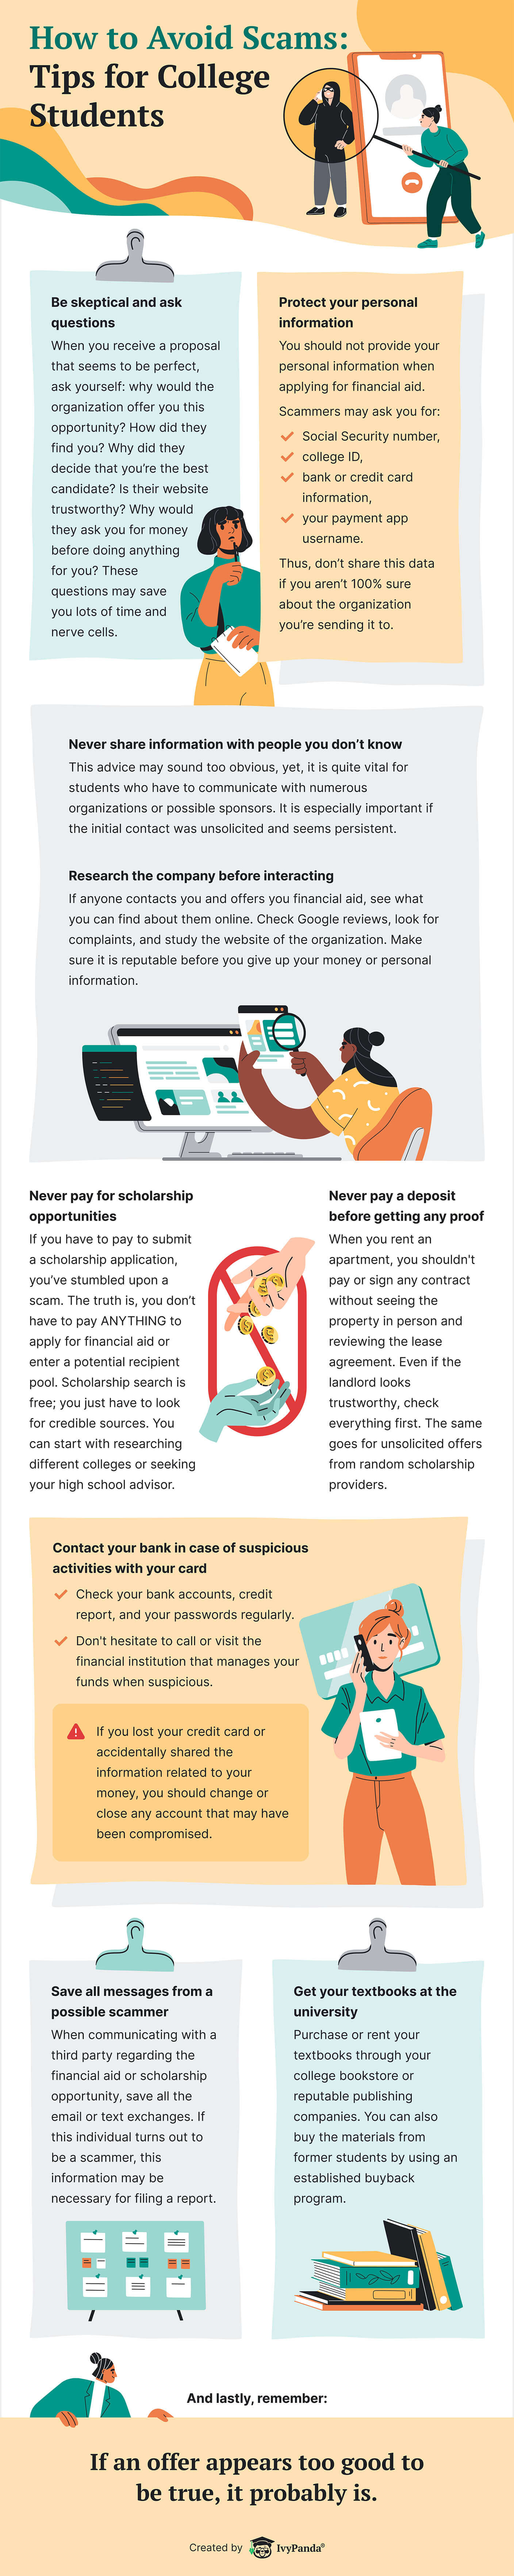 The infographic shows tips for college students.